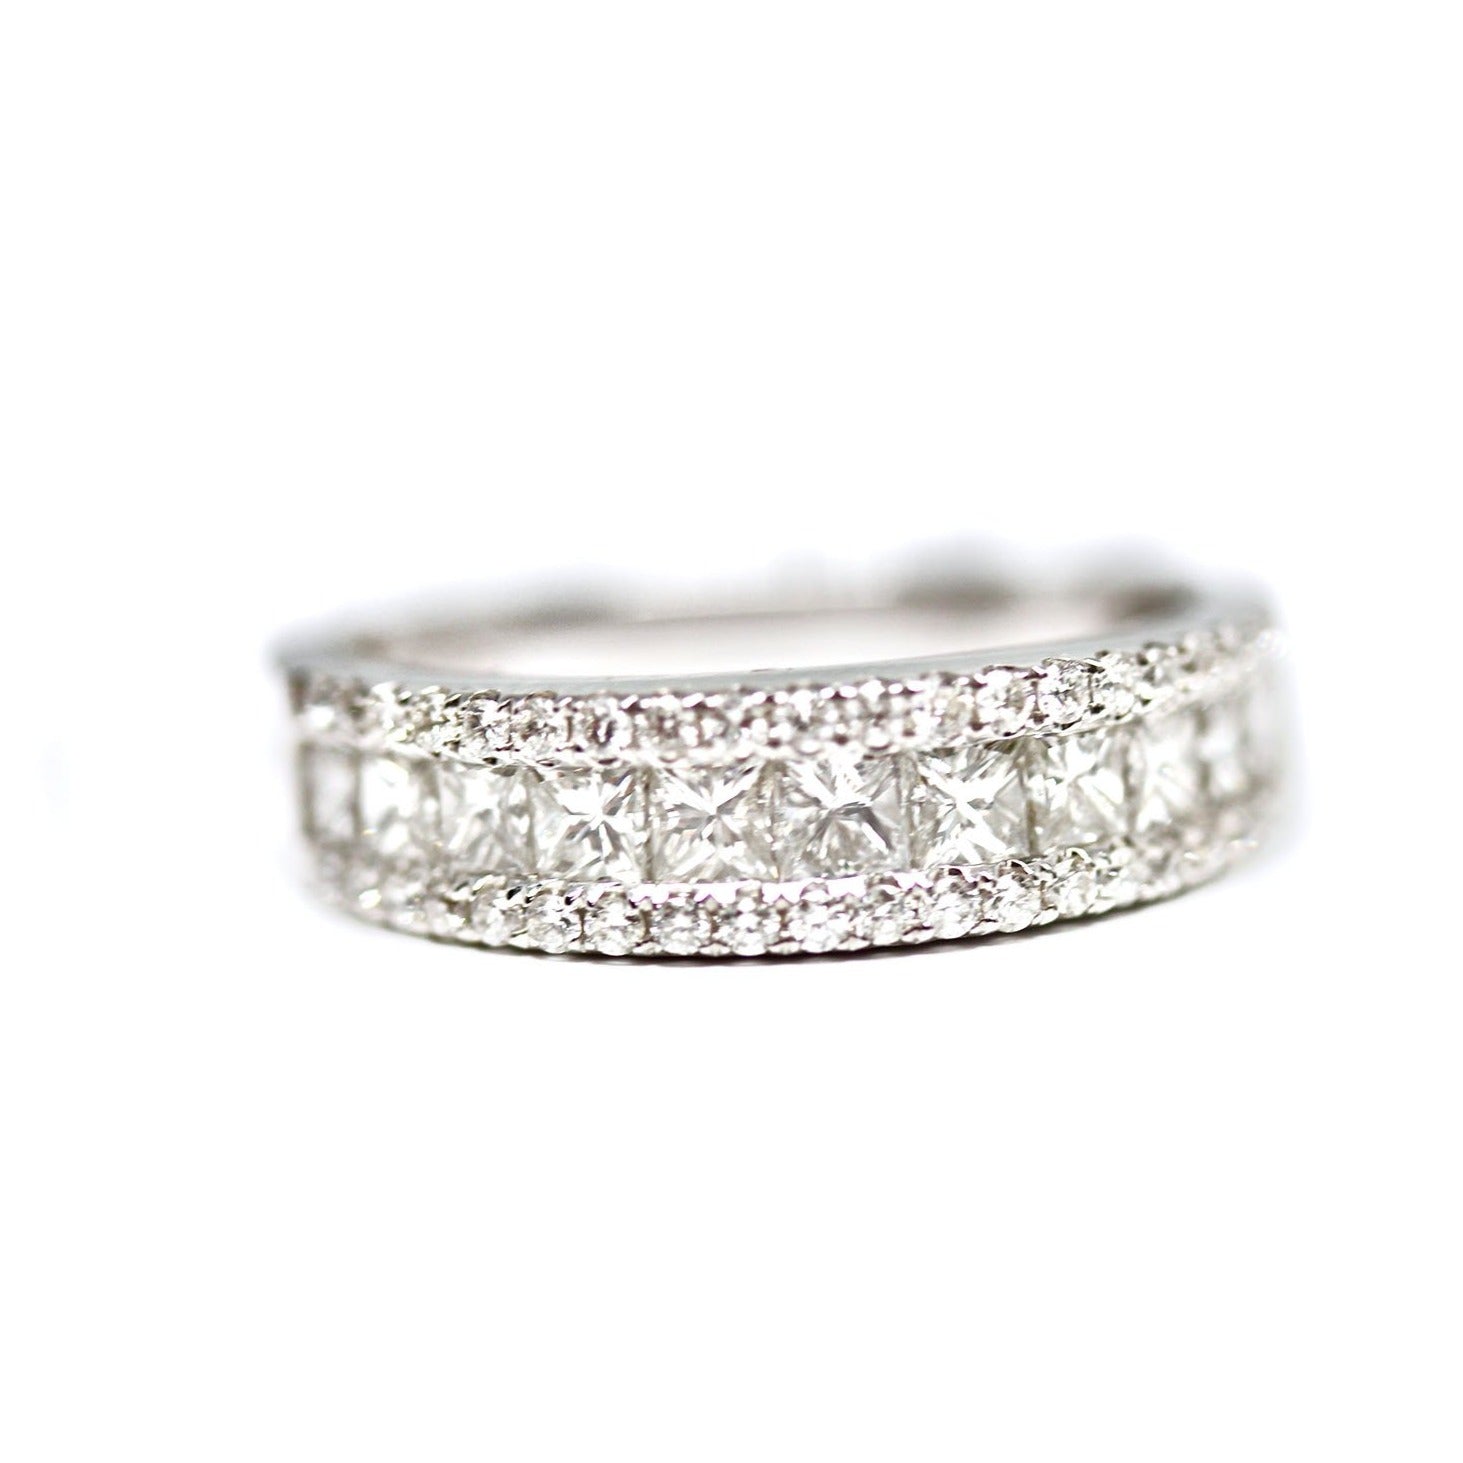 Shop American Diamond 3 Stone Band Ring In 925 Silver